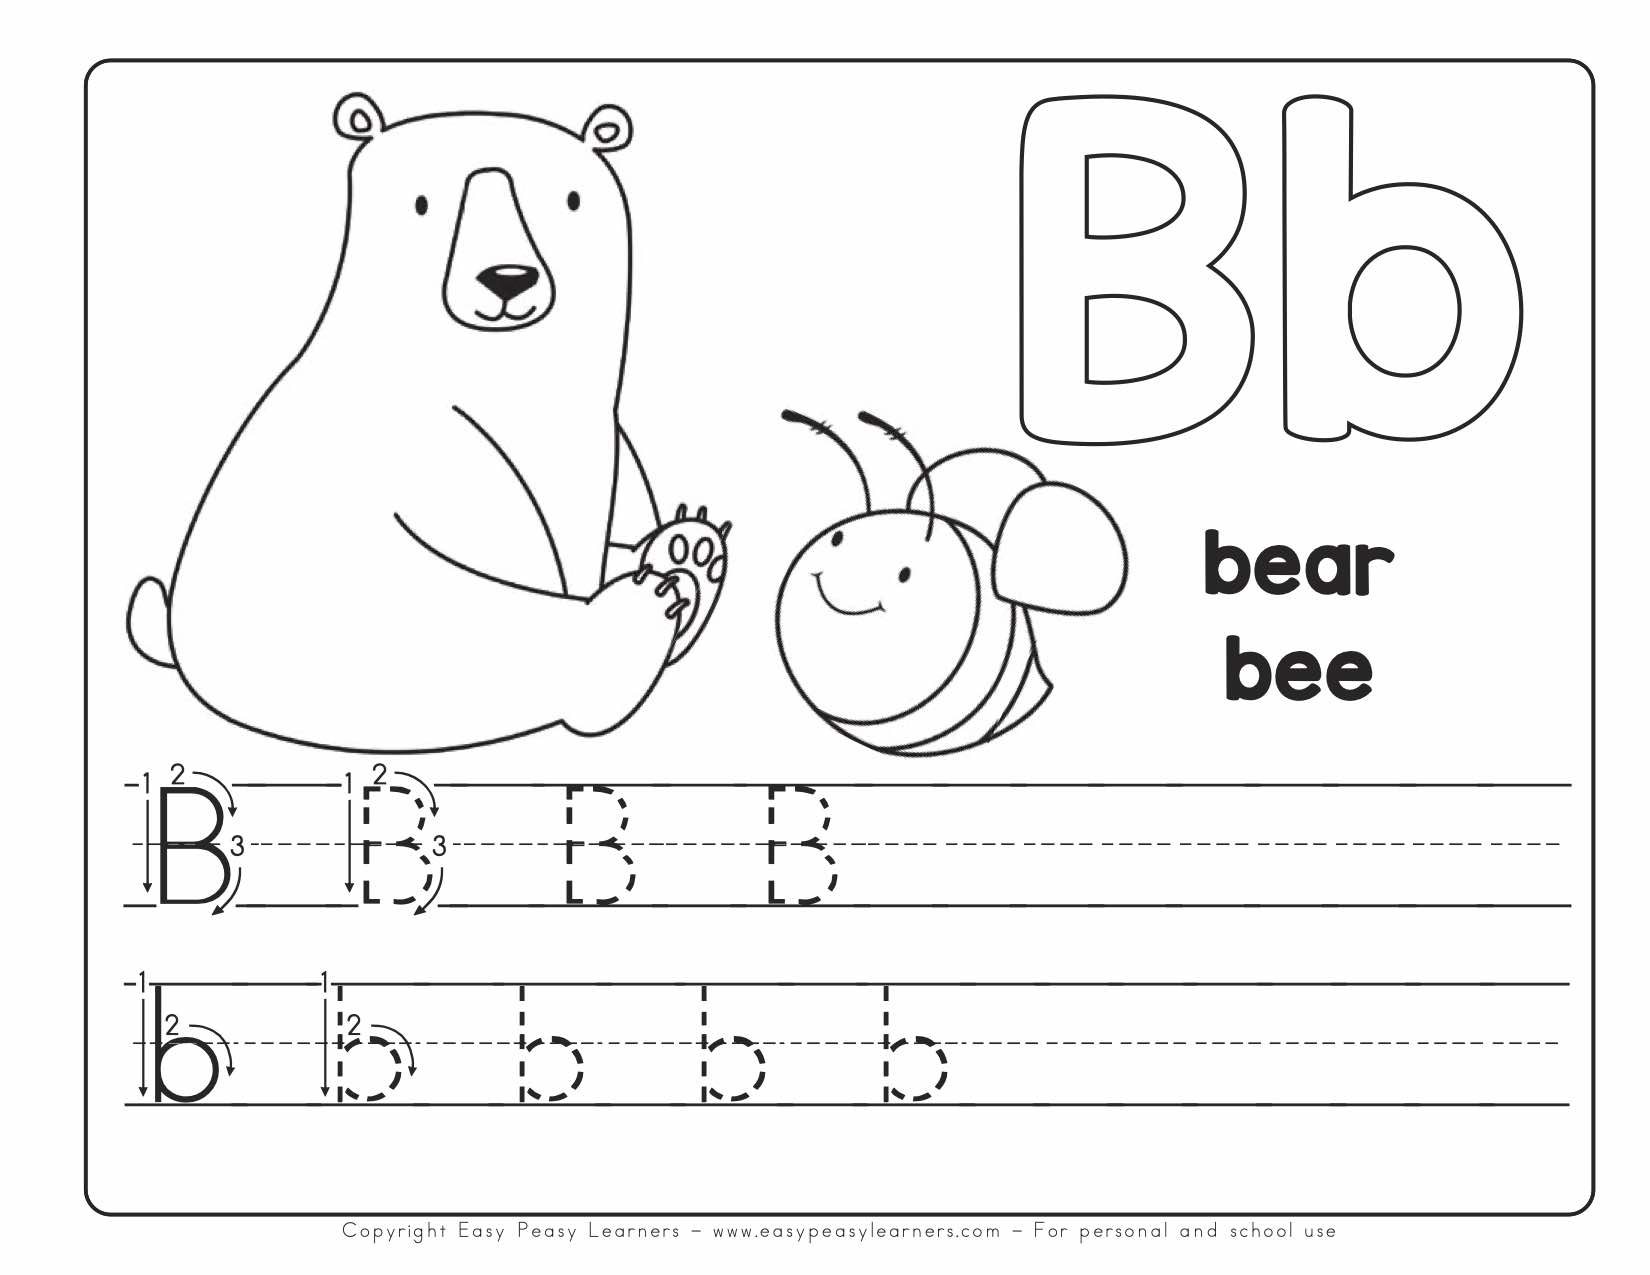 Free Printable Alphabet Book Alphabet Worksheets For Pre K And K Easy Peasy Learners - Free Printable Alphabet Worksheets